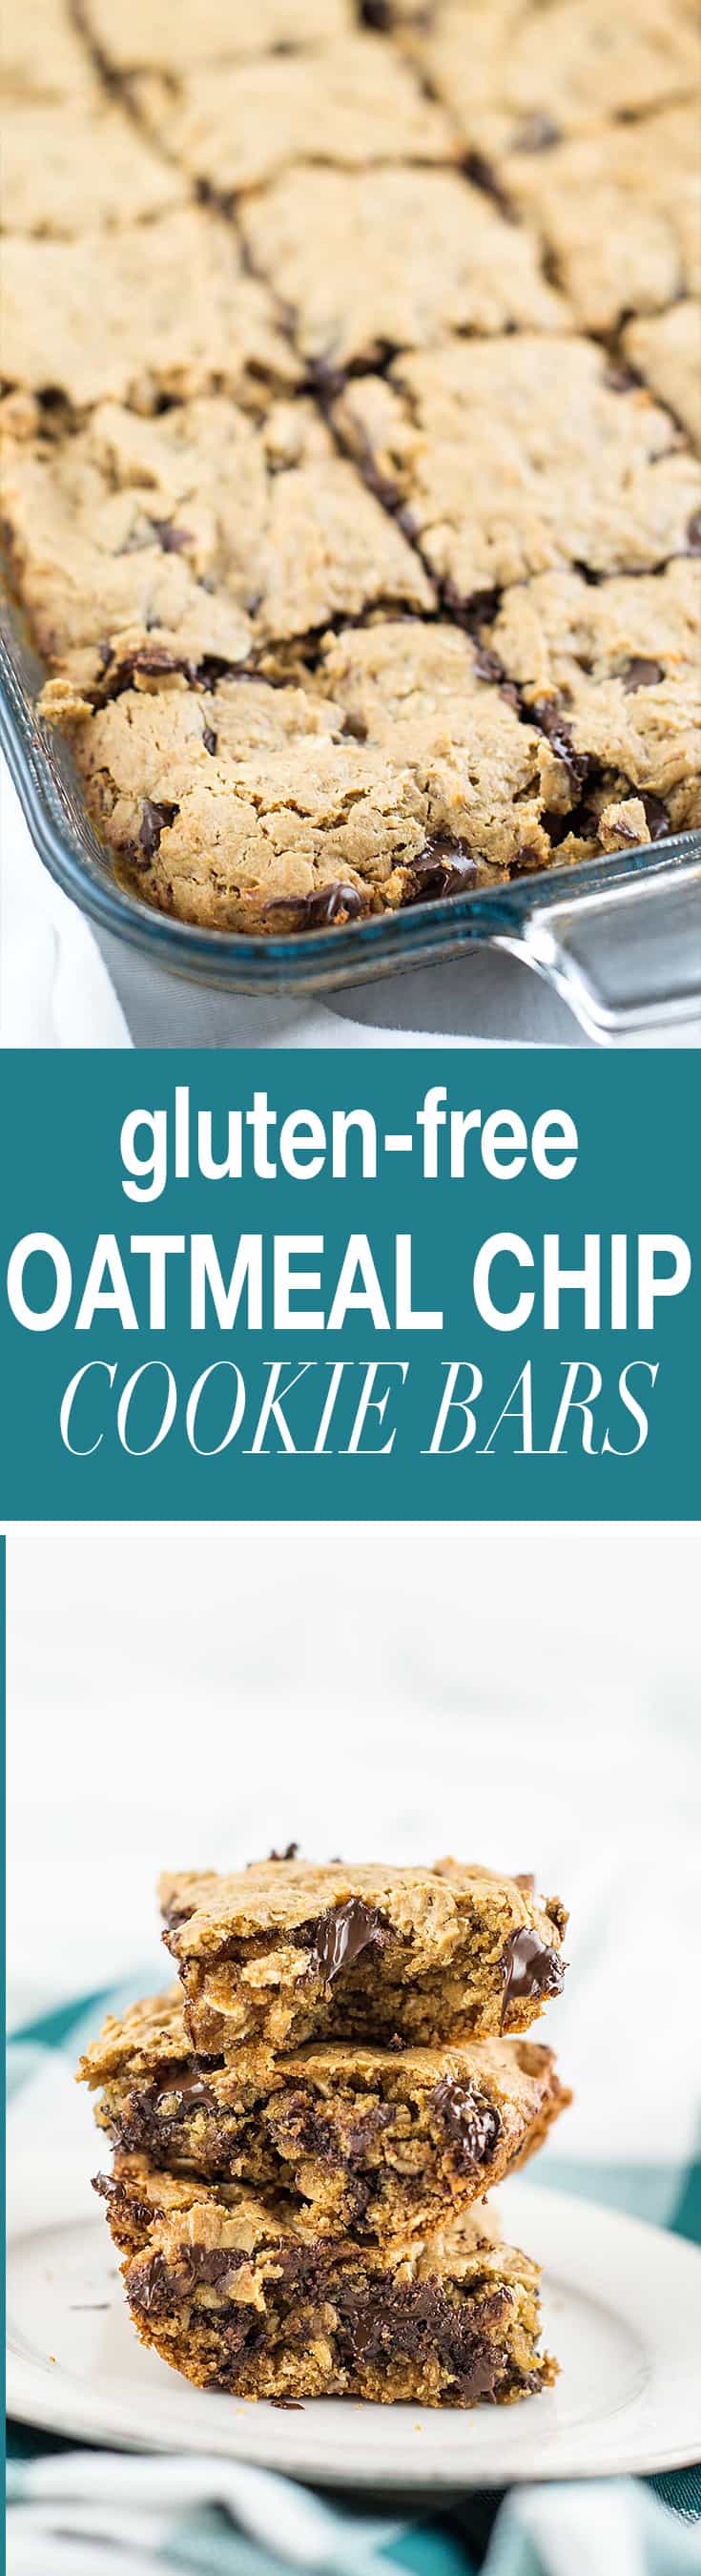 The Best Gluten Free Cookie Bars Recipe - Build Your Bite